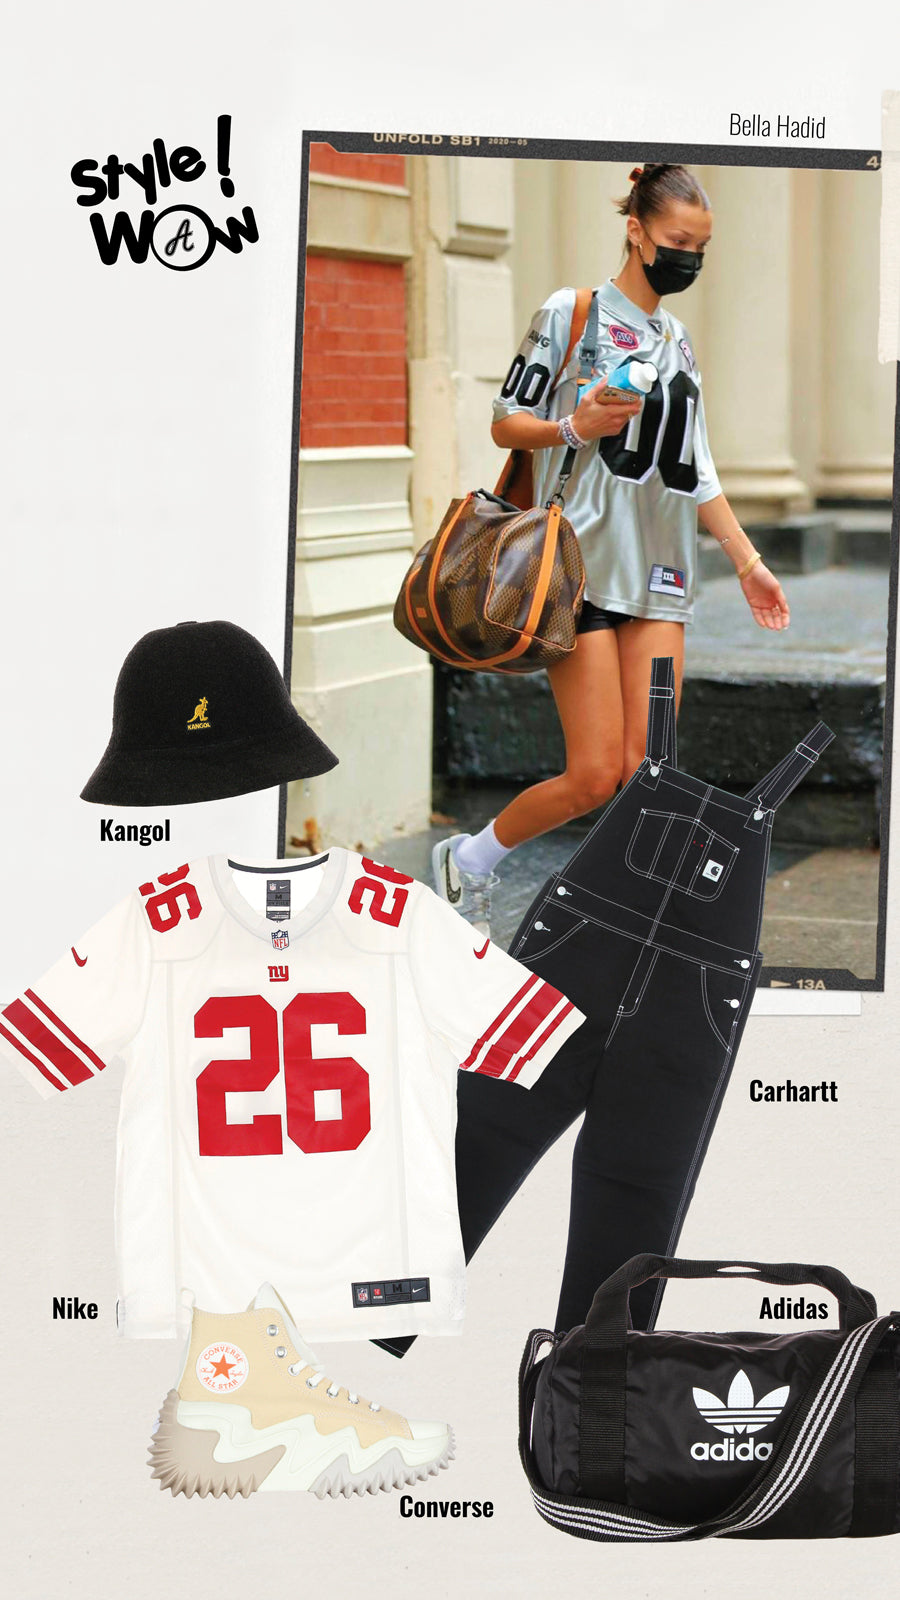 Street outfit inspired by the style of Bella Hadid wearing NFL jersey, consisting of a white and red Nike NFL New York Giants game jersey, black Kangol bucket hat, black denim overalls with white stitching and Converse Run Star high-top sneakers Motion with wave sole